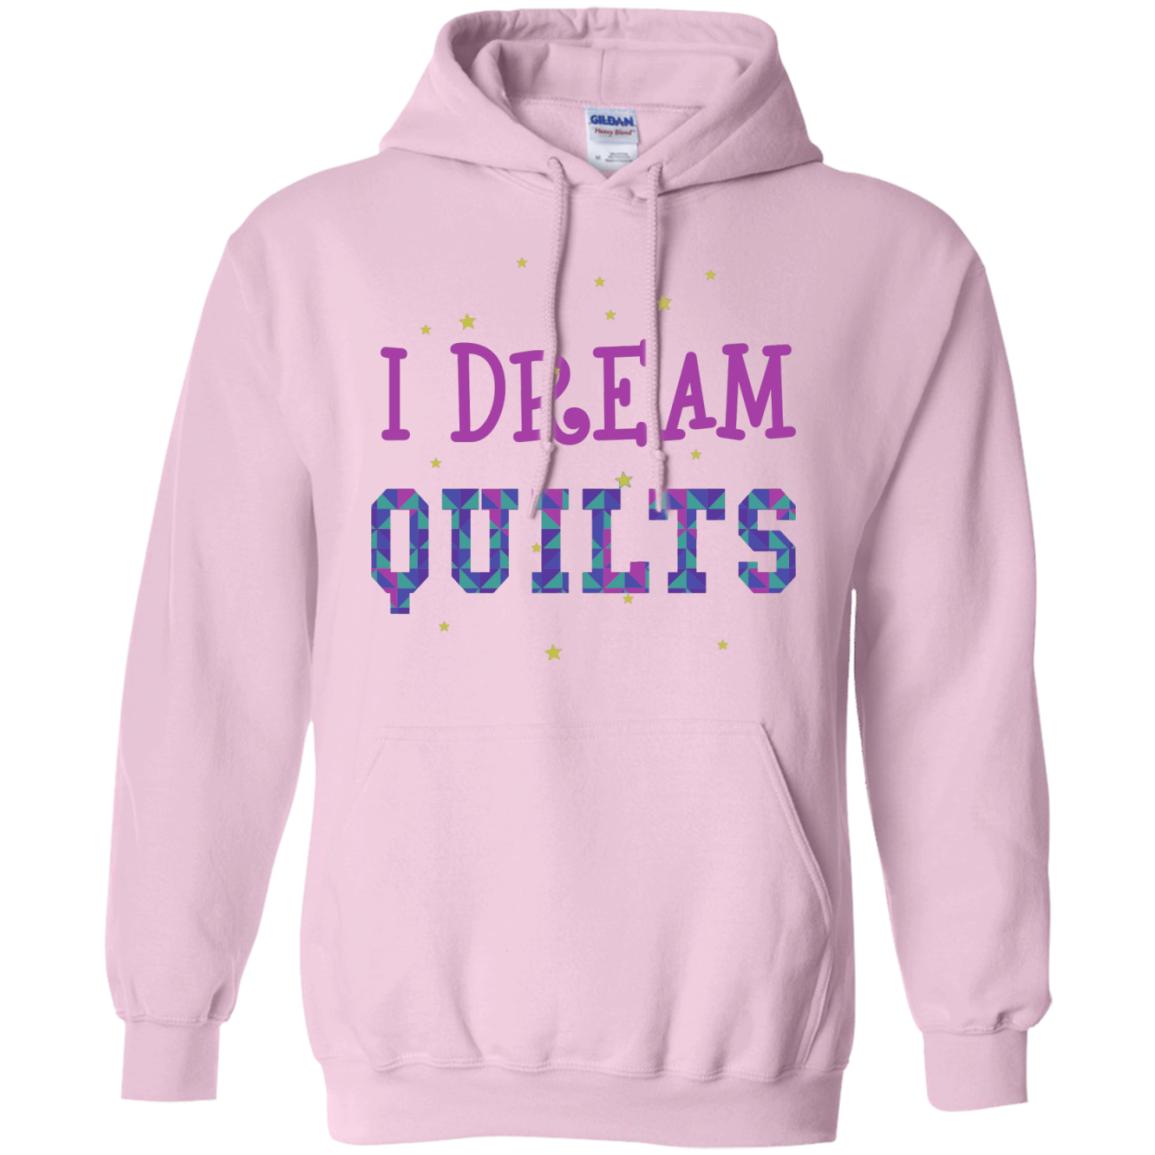 I Dream Quilts Pullover Hoodie - Crafter4Life - 9